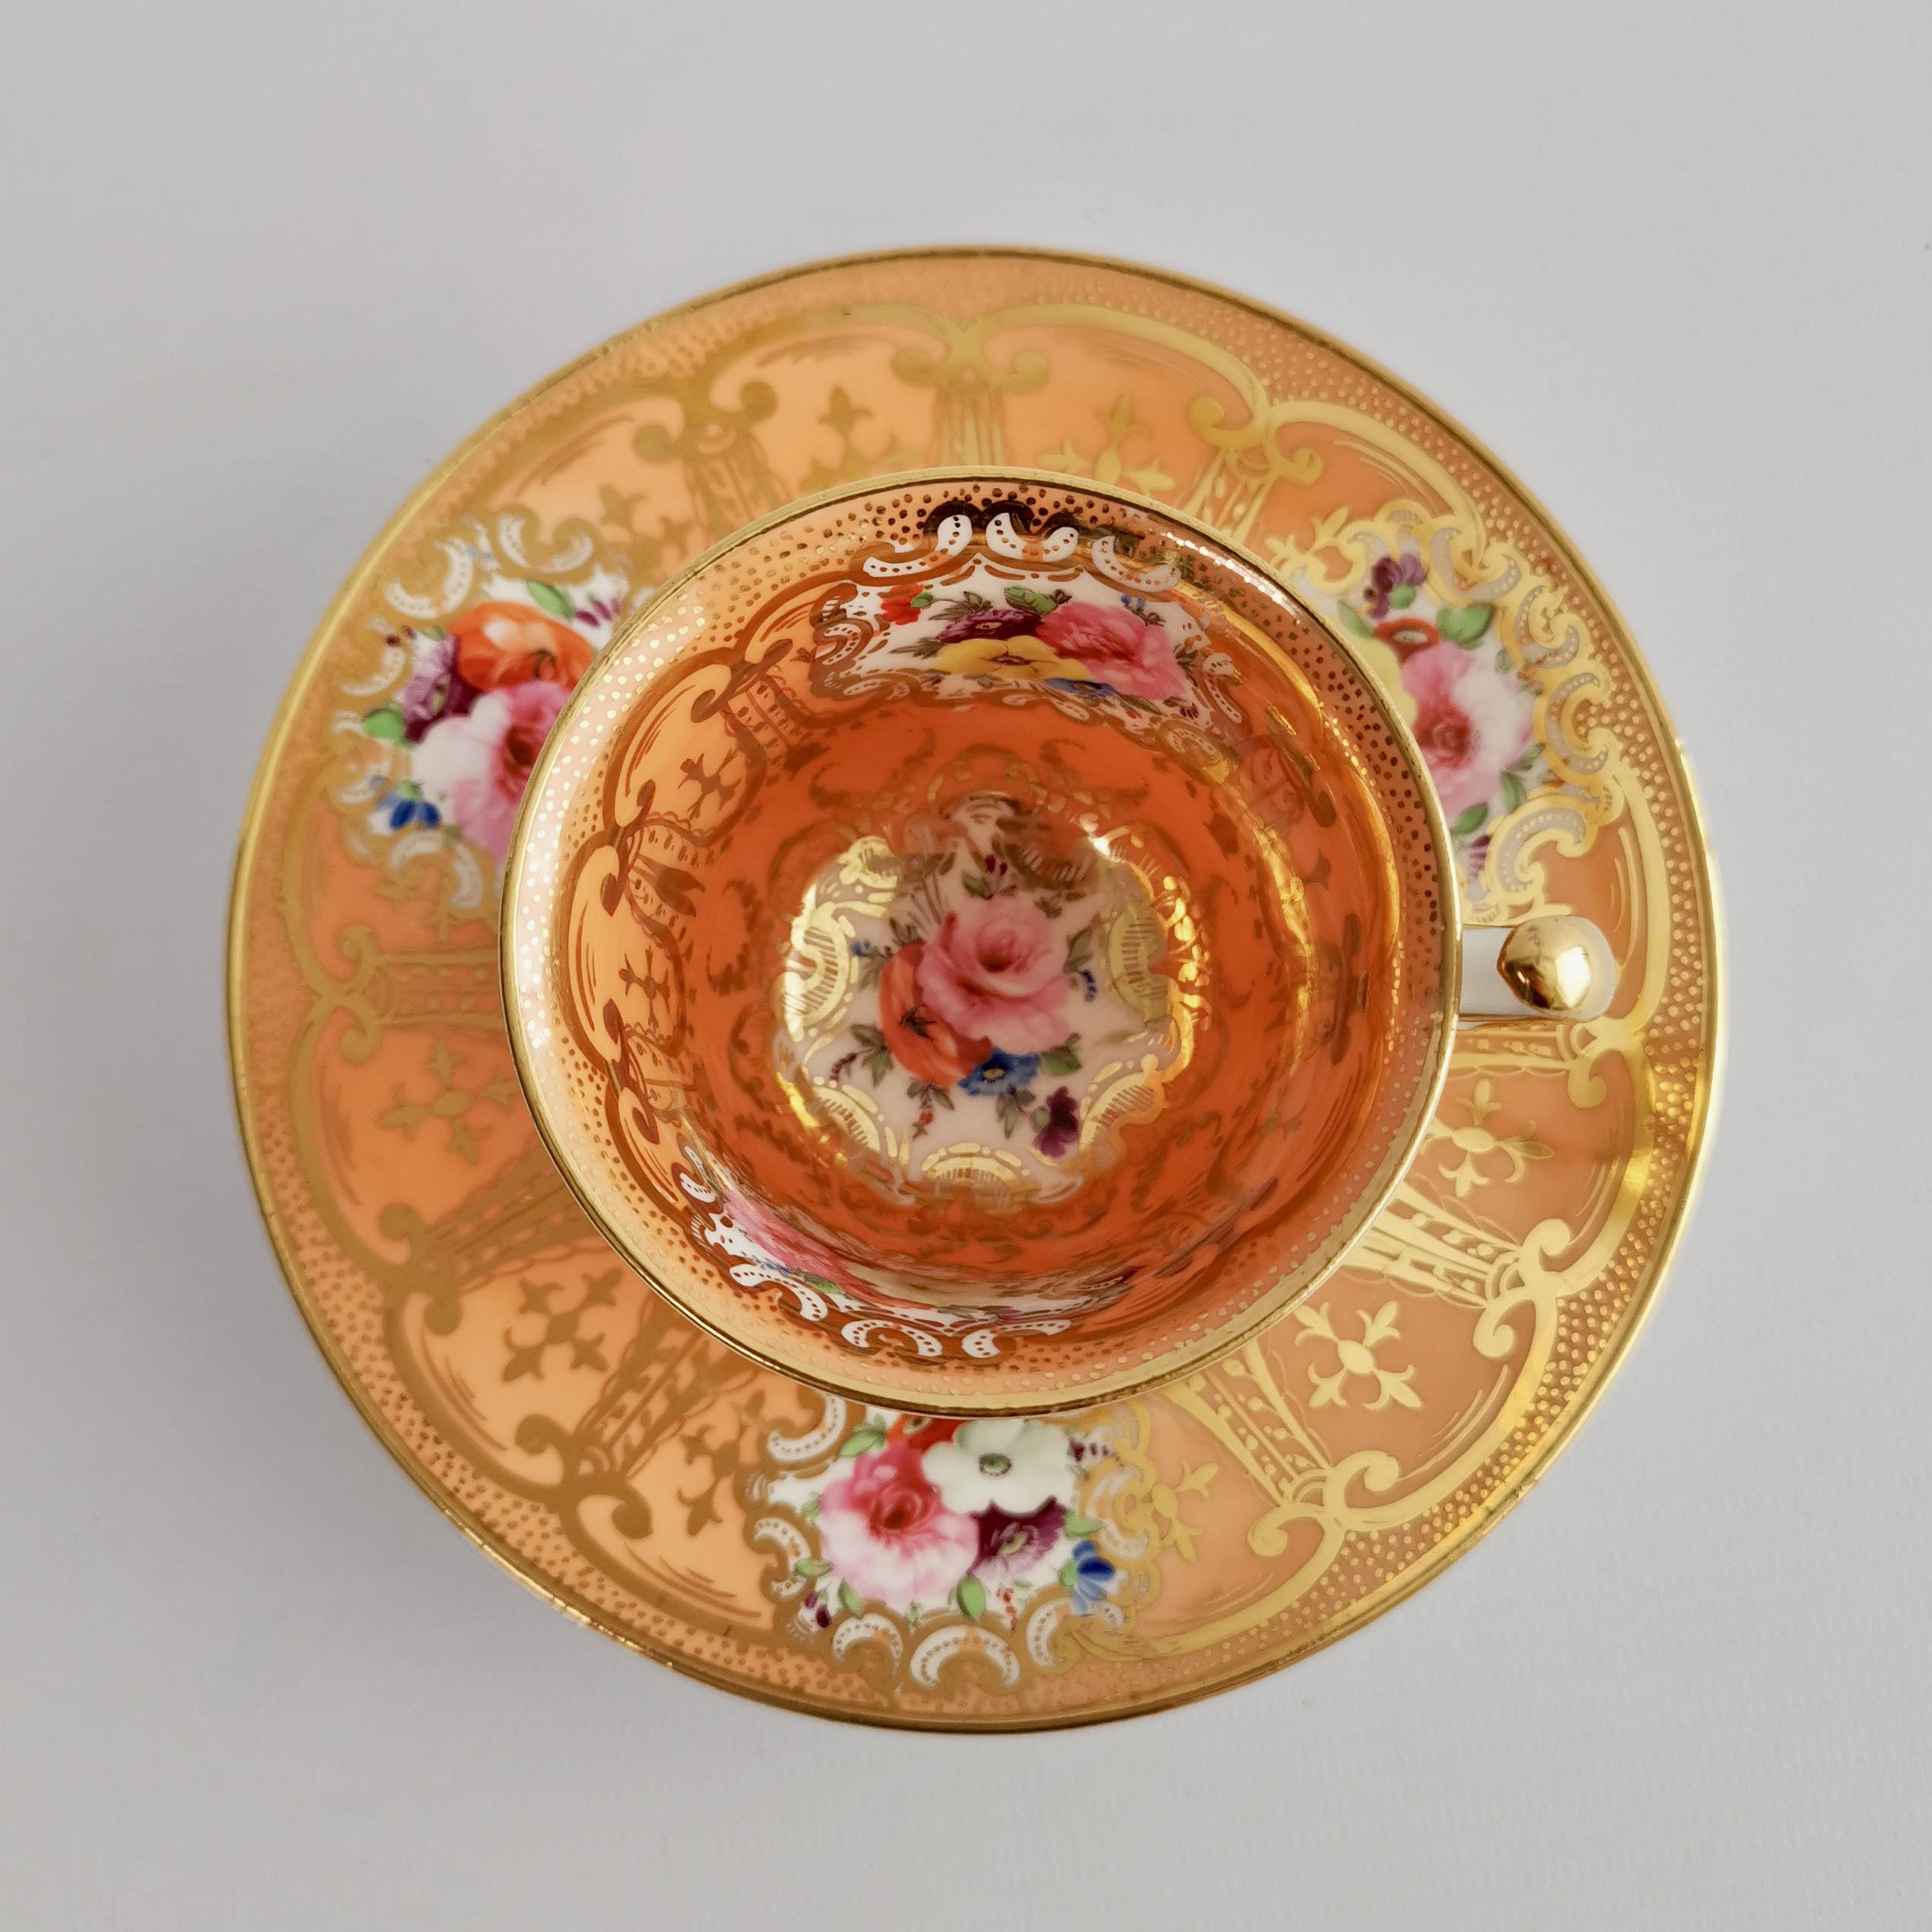 English Coalport Porcelain Coffee Cup, Orange with Gilt and Flowers, Regency, ca 1815